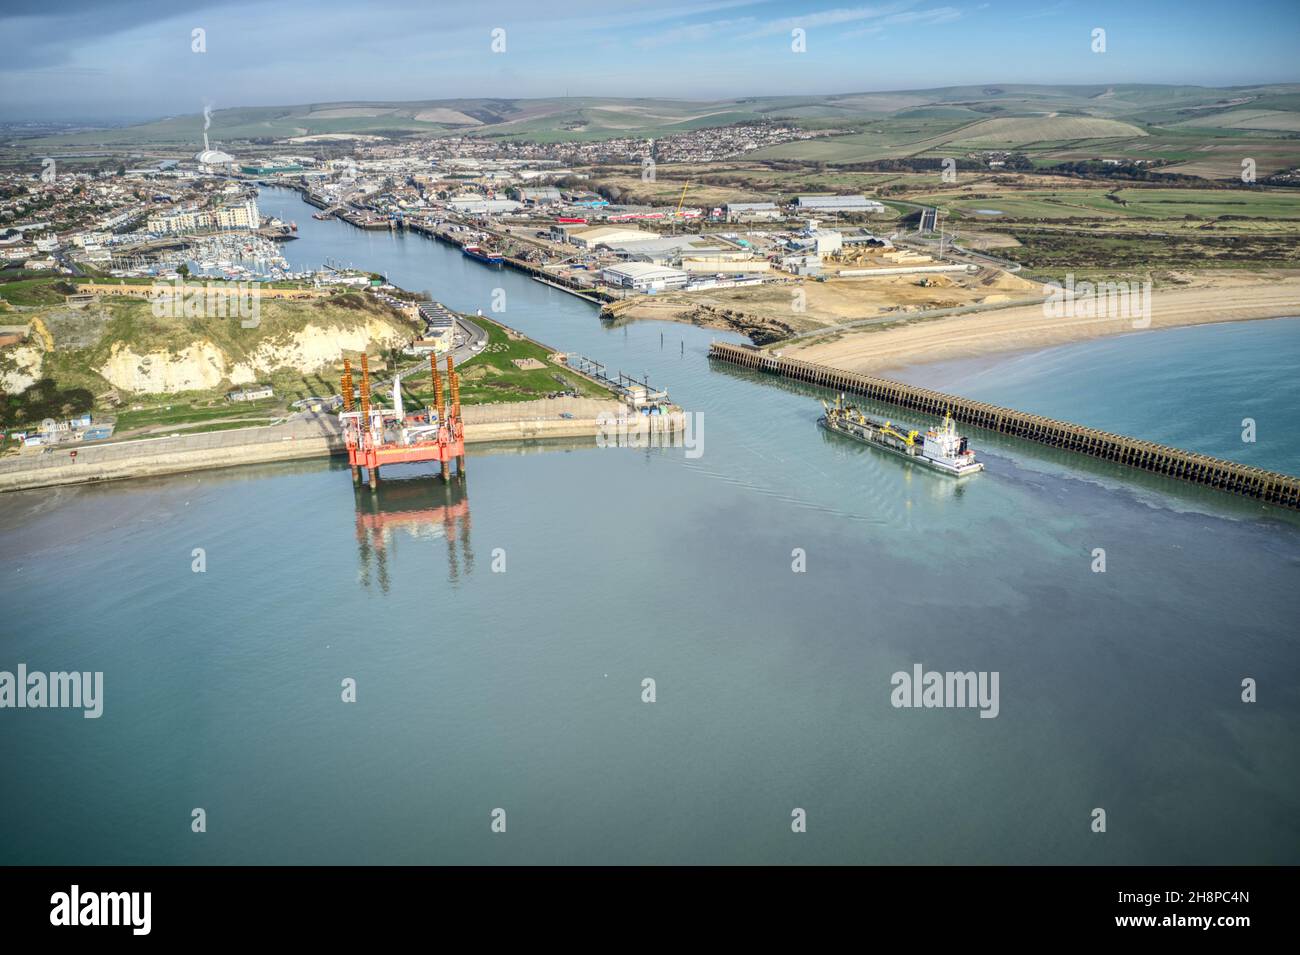 A Hopper dredger in Newhaven Bay before entering the port and the River Ouse. Aerial photo, Stock Photo